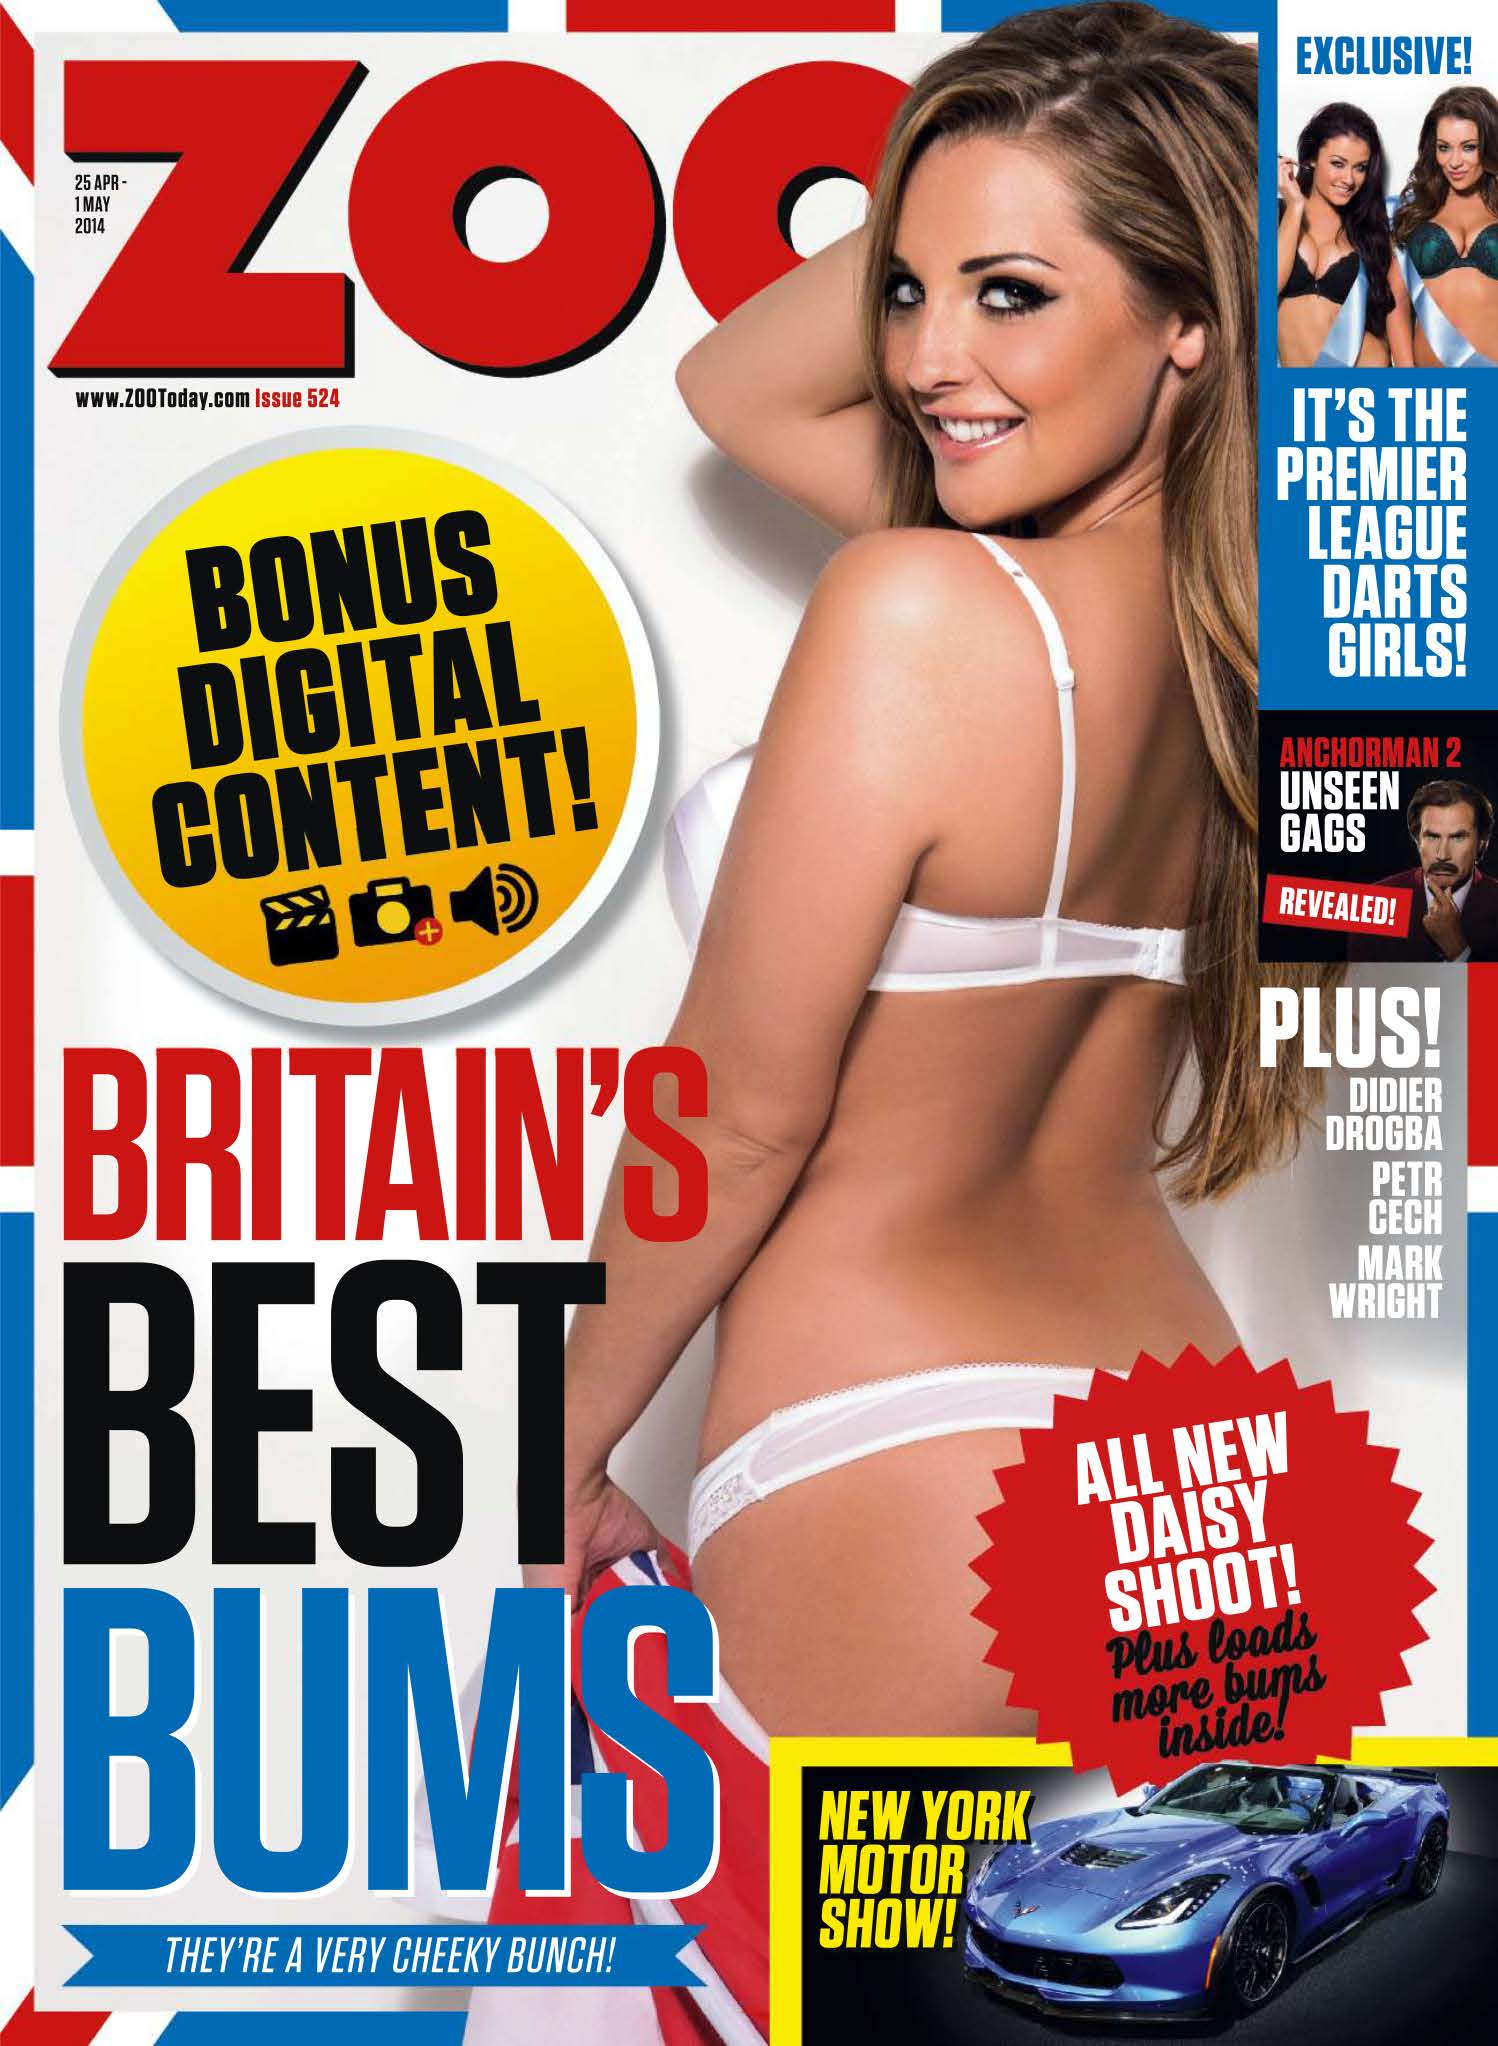 Daisy Watts presents Britain’s Best Bums for Zoo Magazine